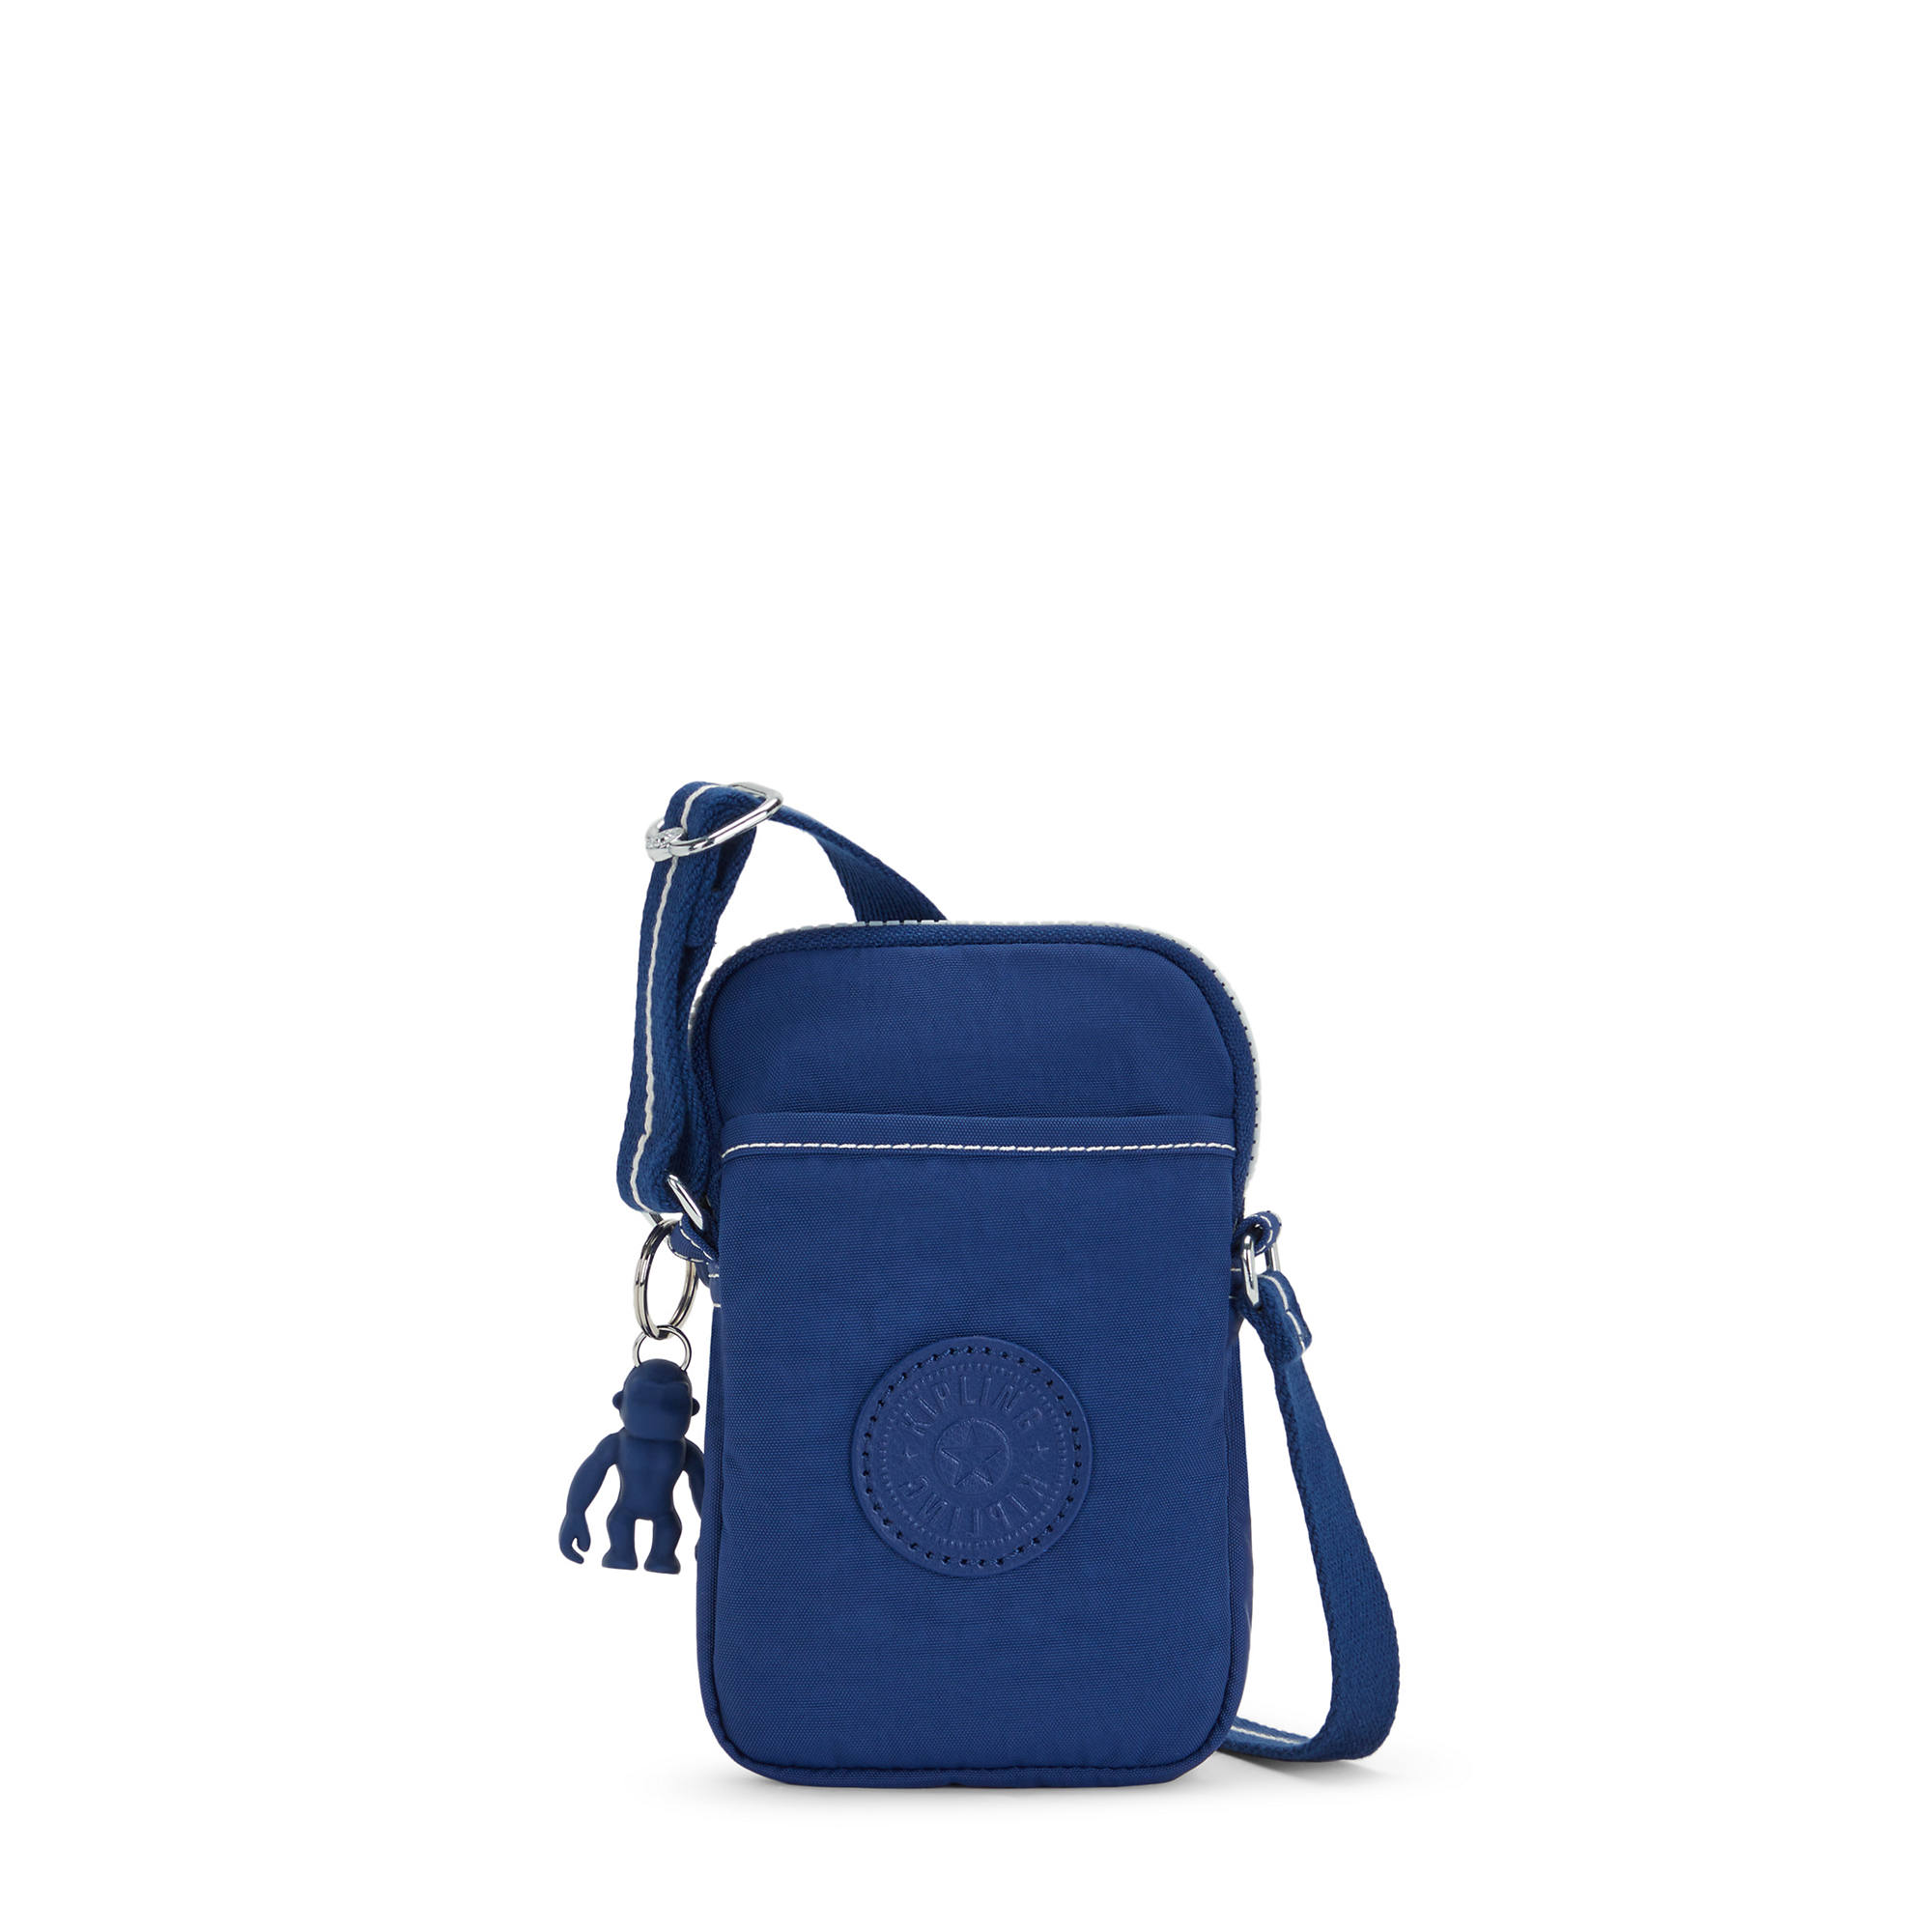 Tally Crossbody Phone Bag, Admiral Blue, large-zoomed